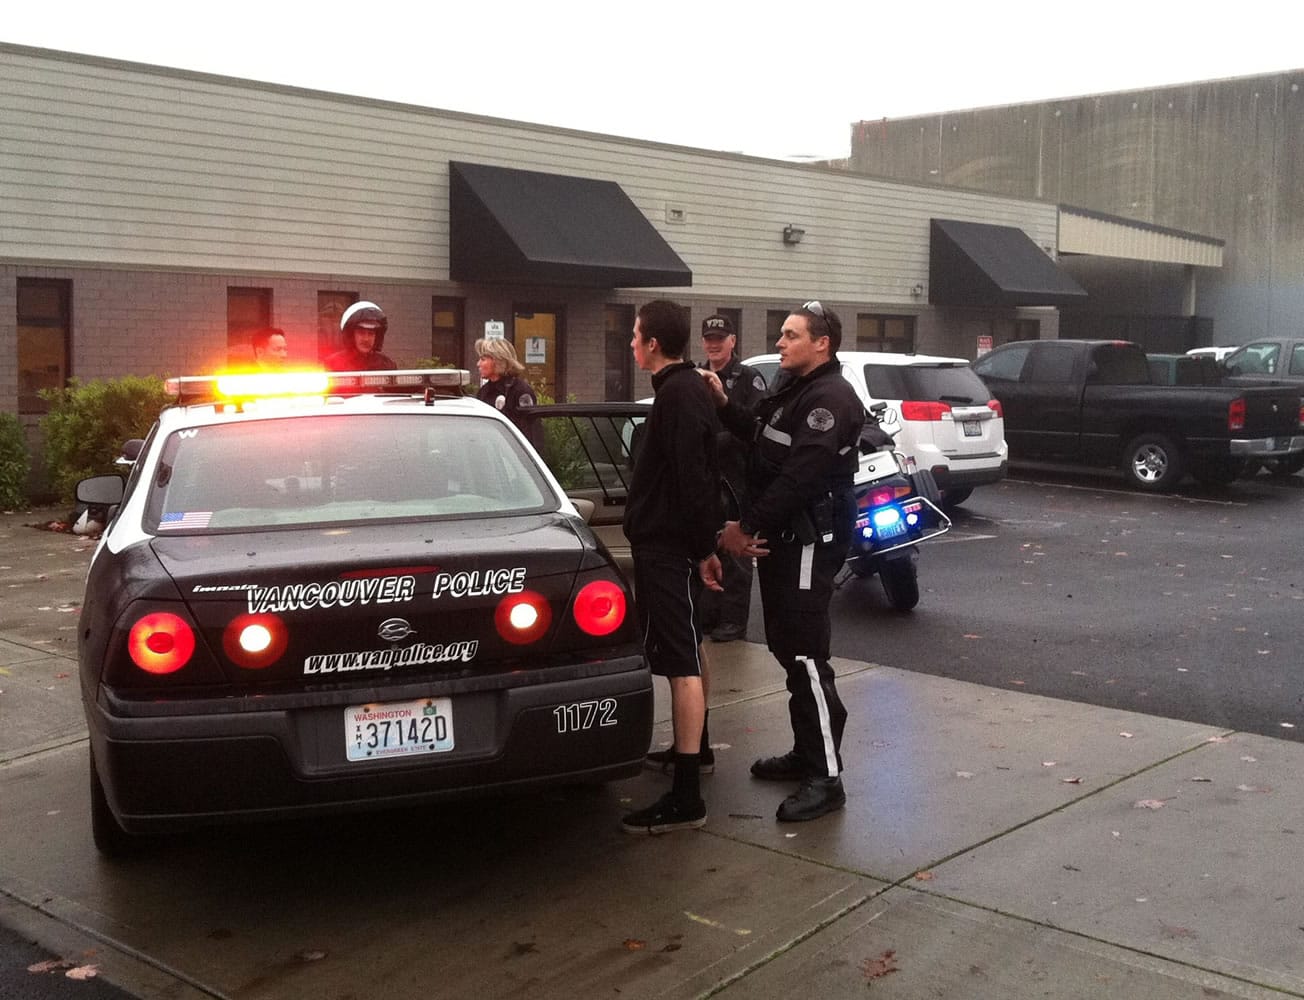 Vancouver police detained a suspect after a short foot chase in downtown Vancouver on Tuesday morning.